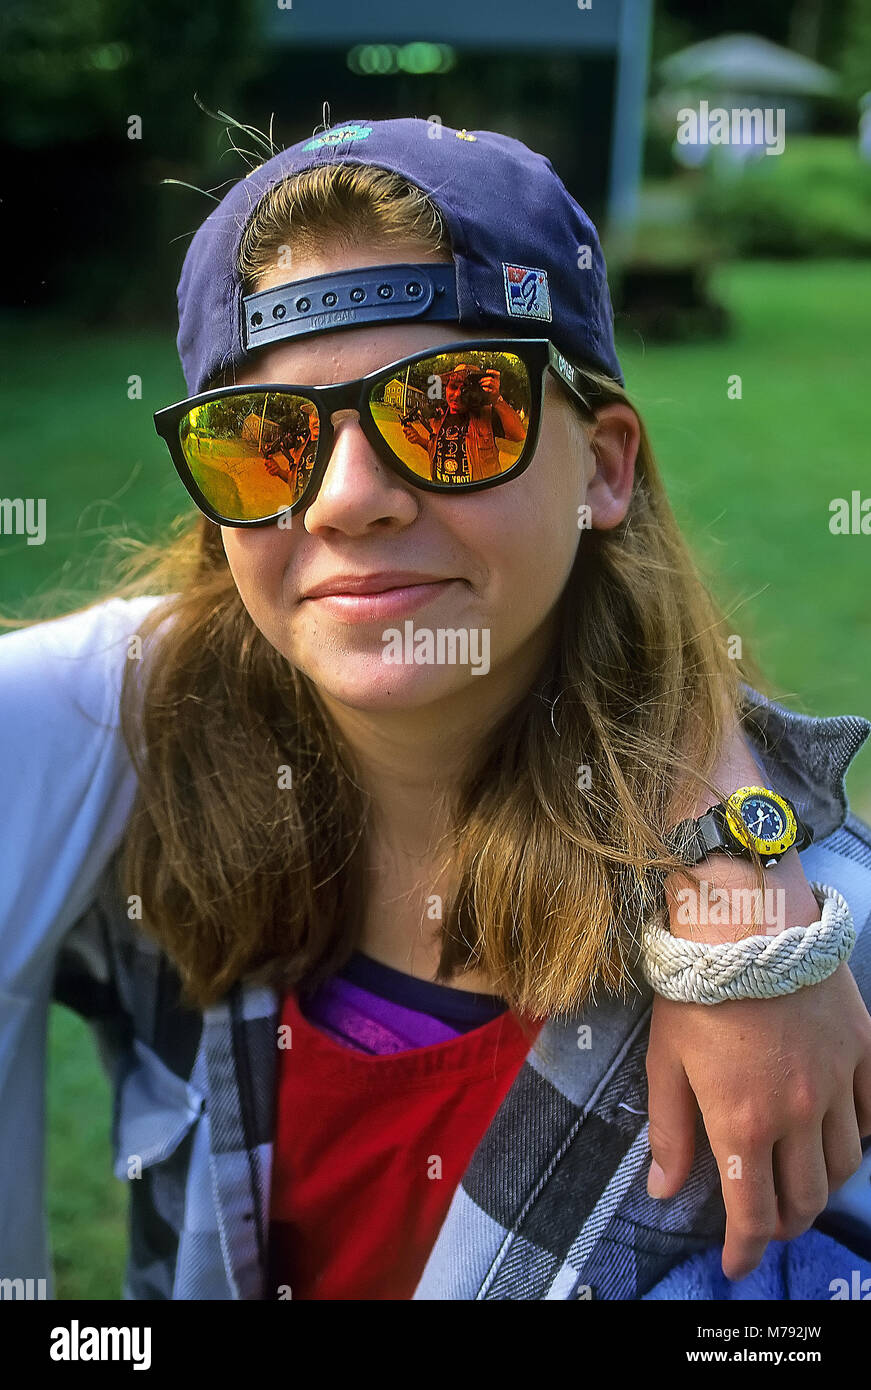 Portrait of a teenage girl about 16-19 years old at summer camp wearing reflector sunglasses and her hat on backwards in Vermont, USA. Stock Photo